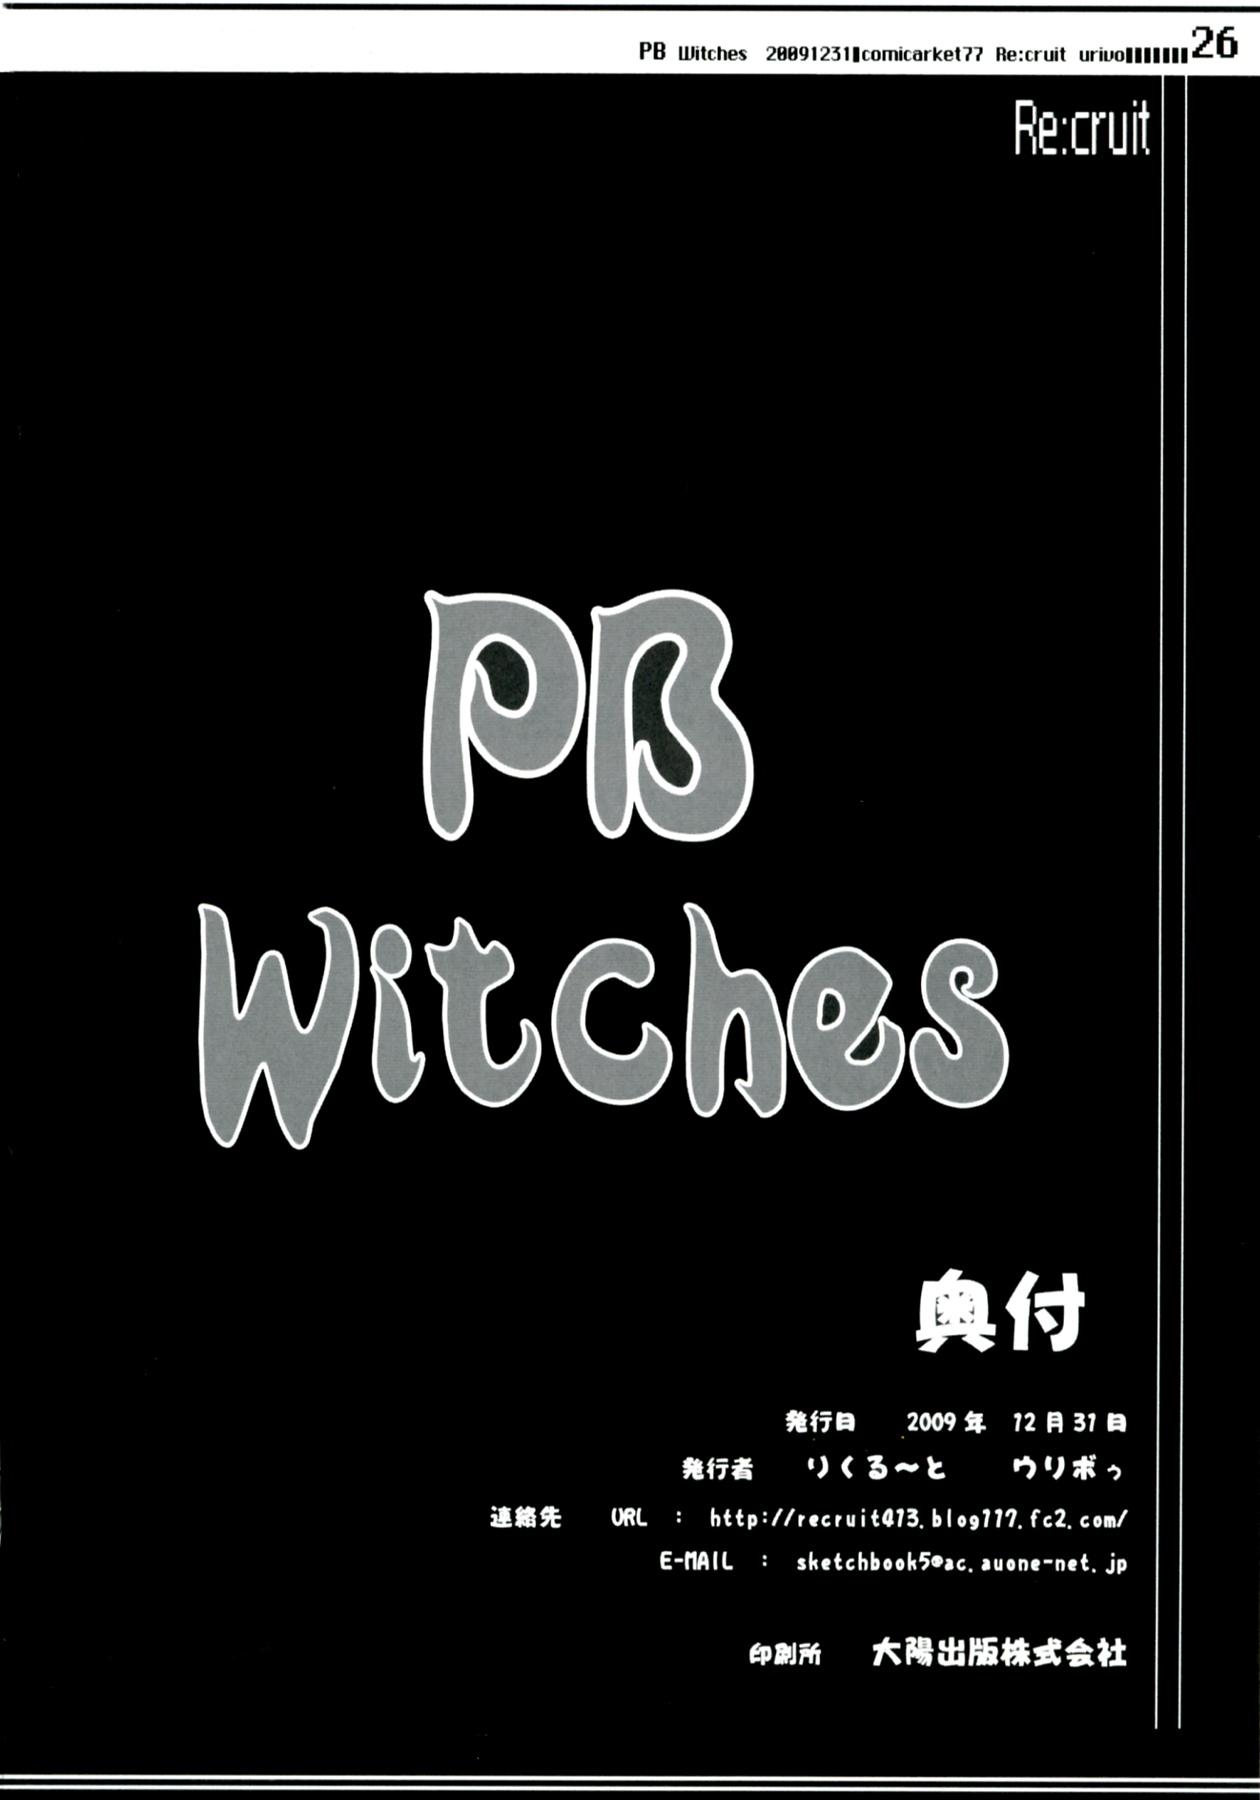 PB Witches 25